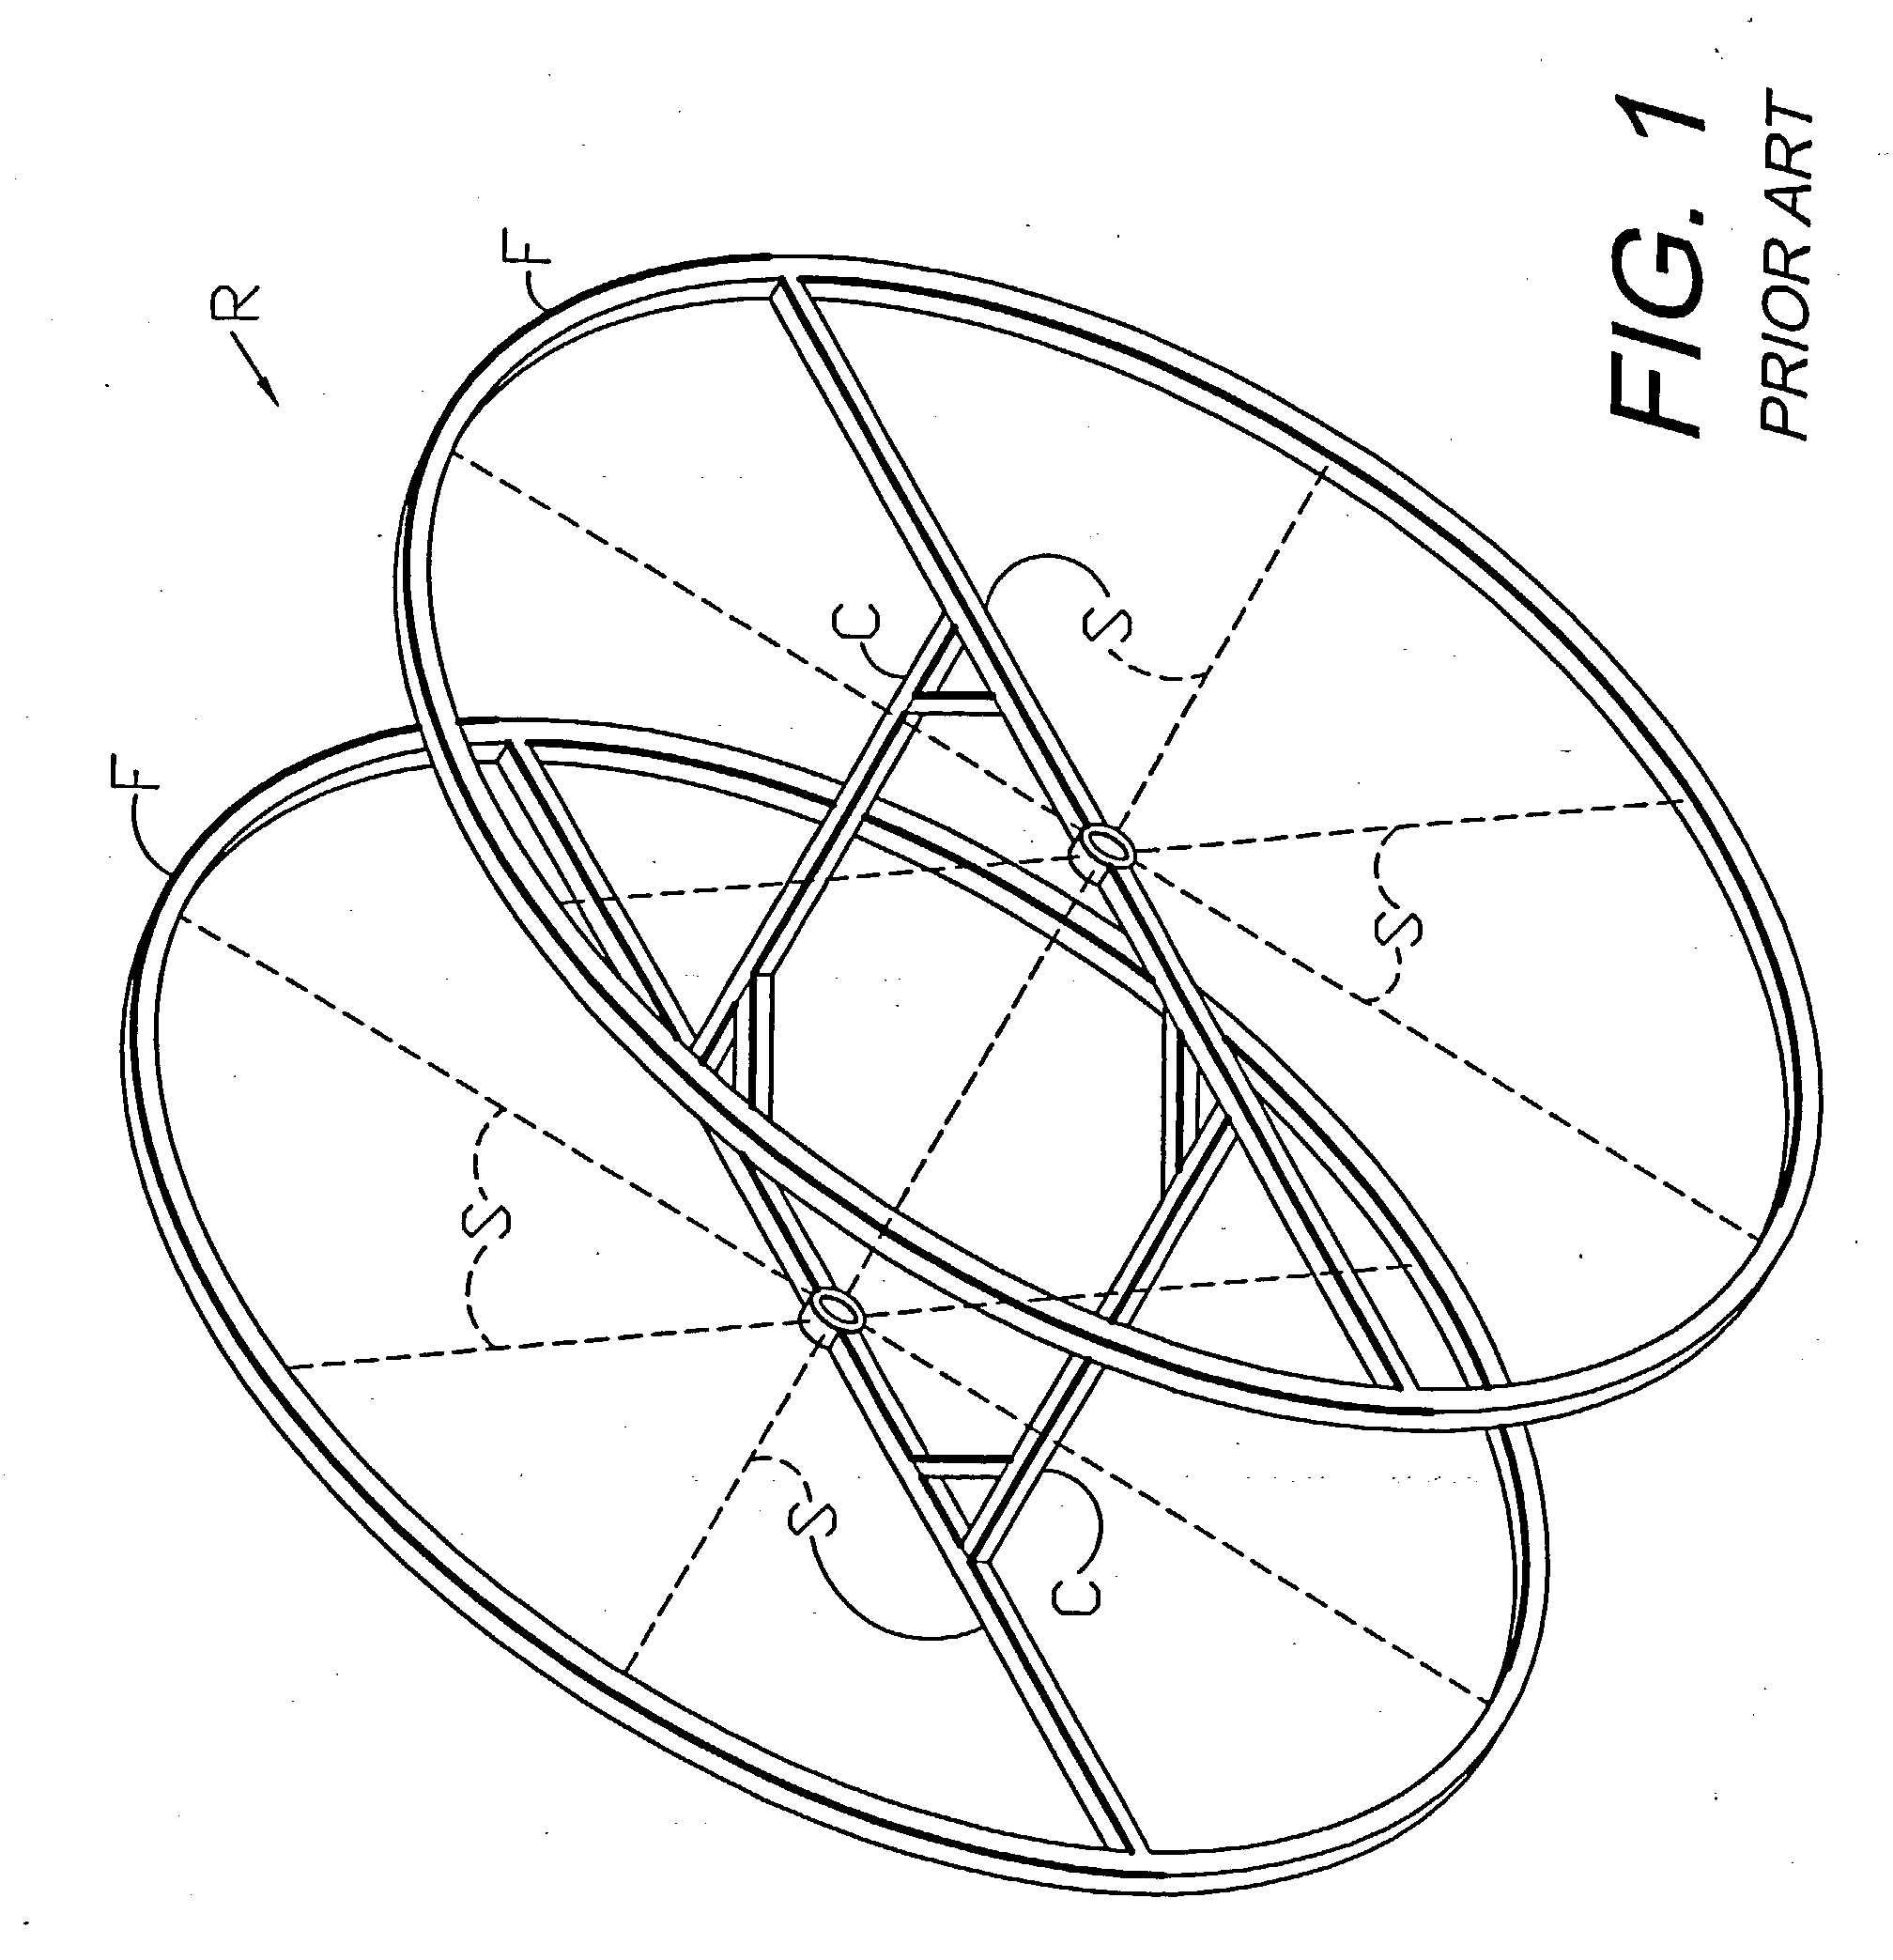 Knockdown, changeable reel system and method